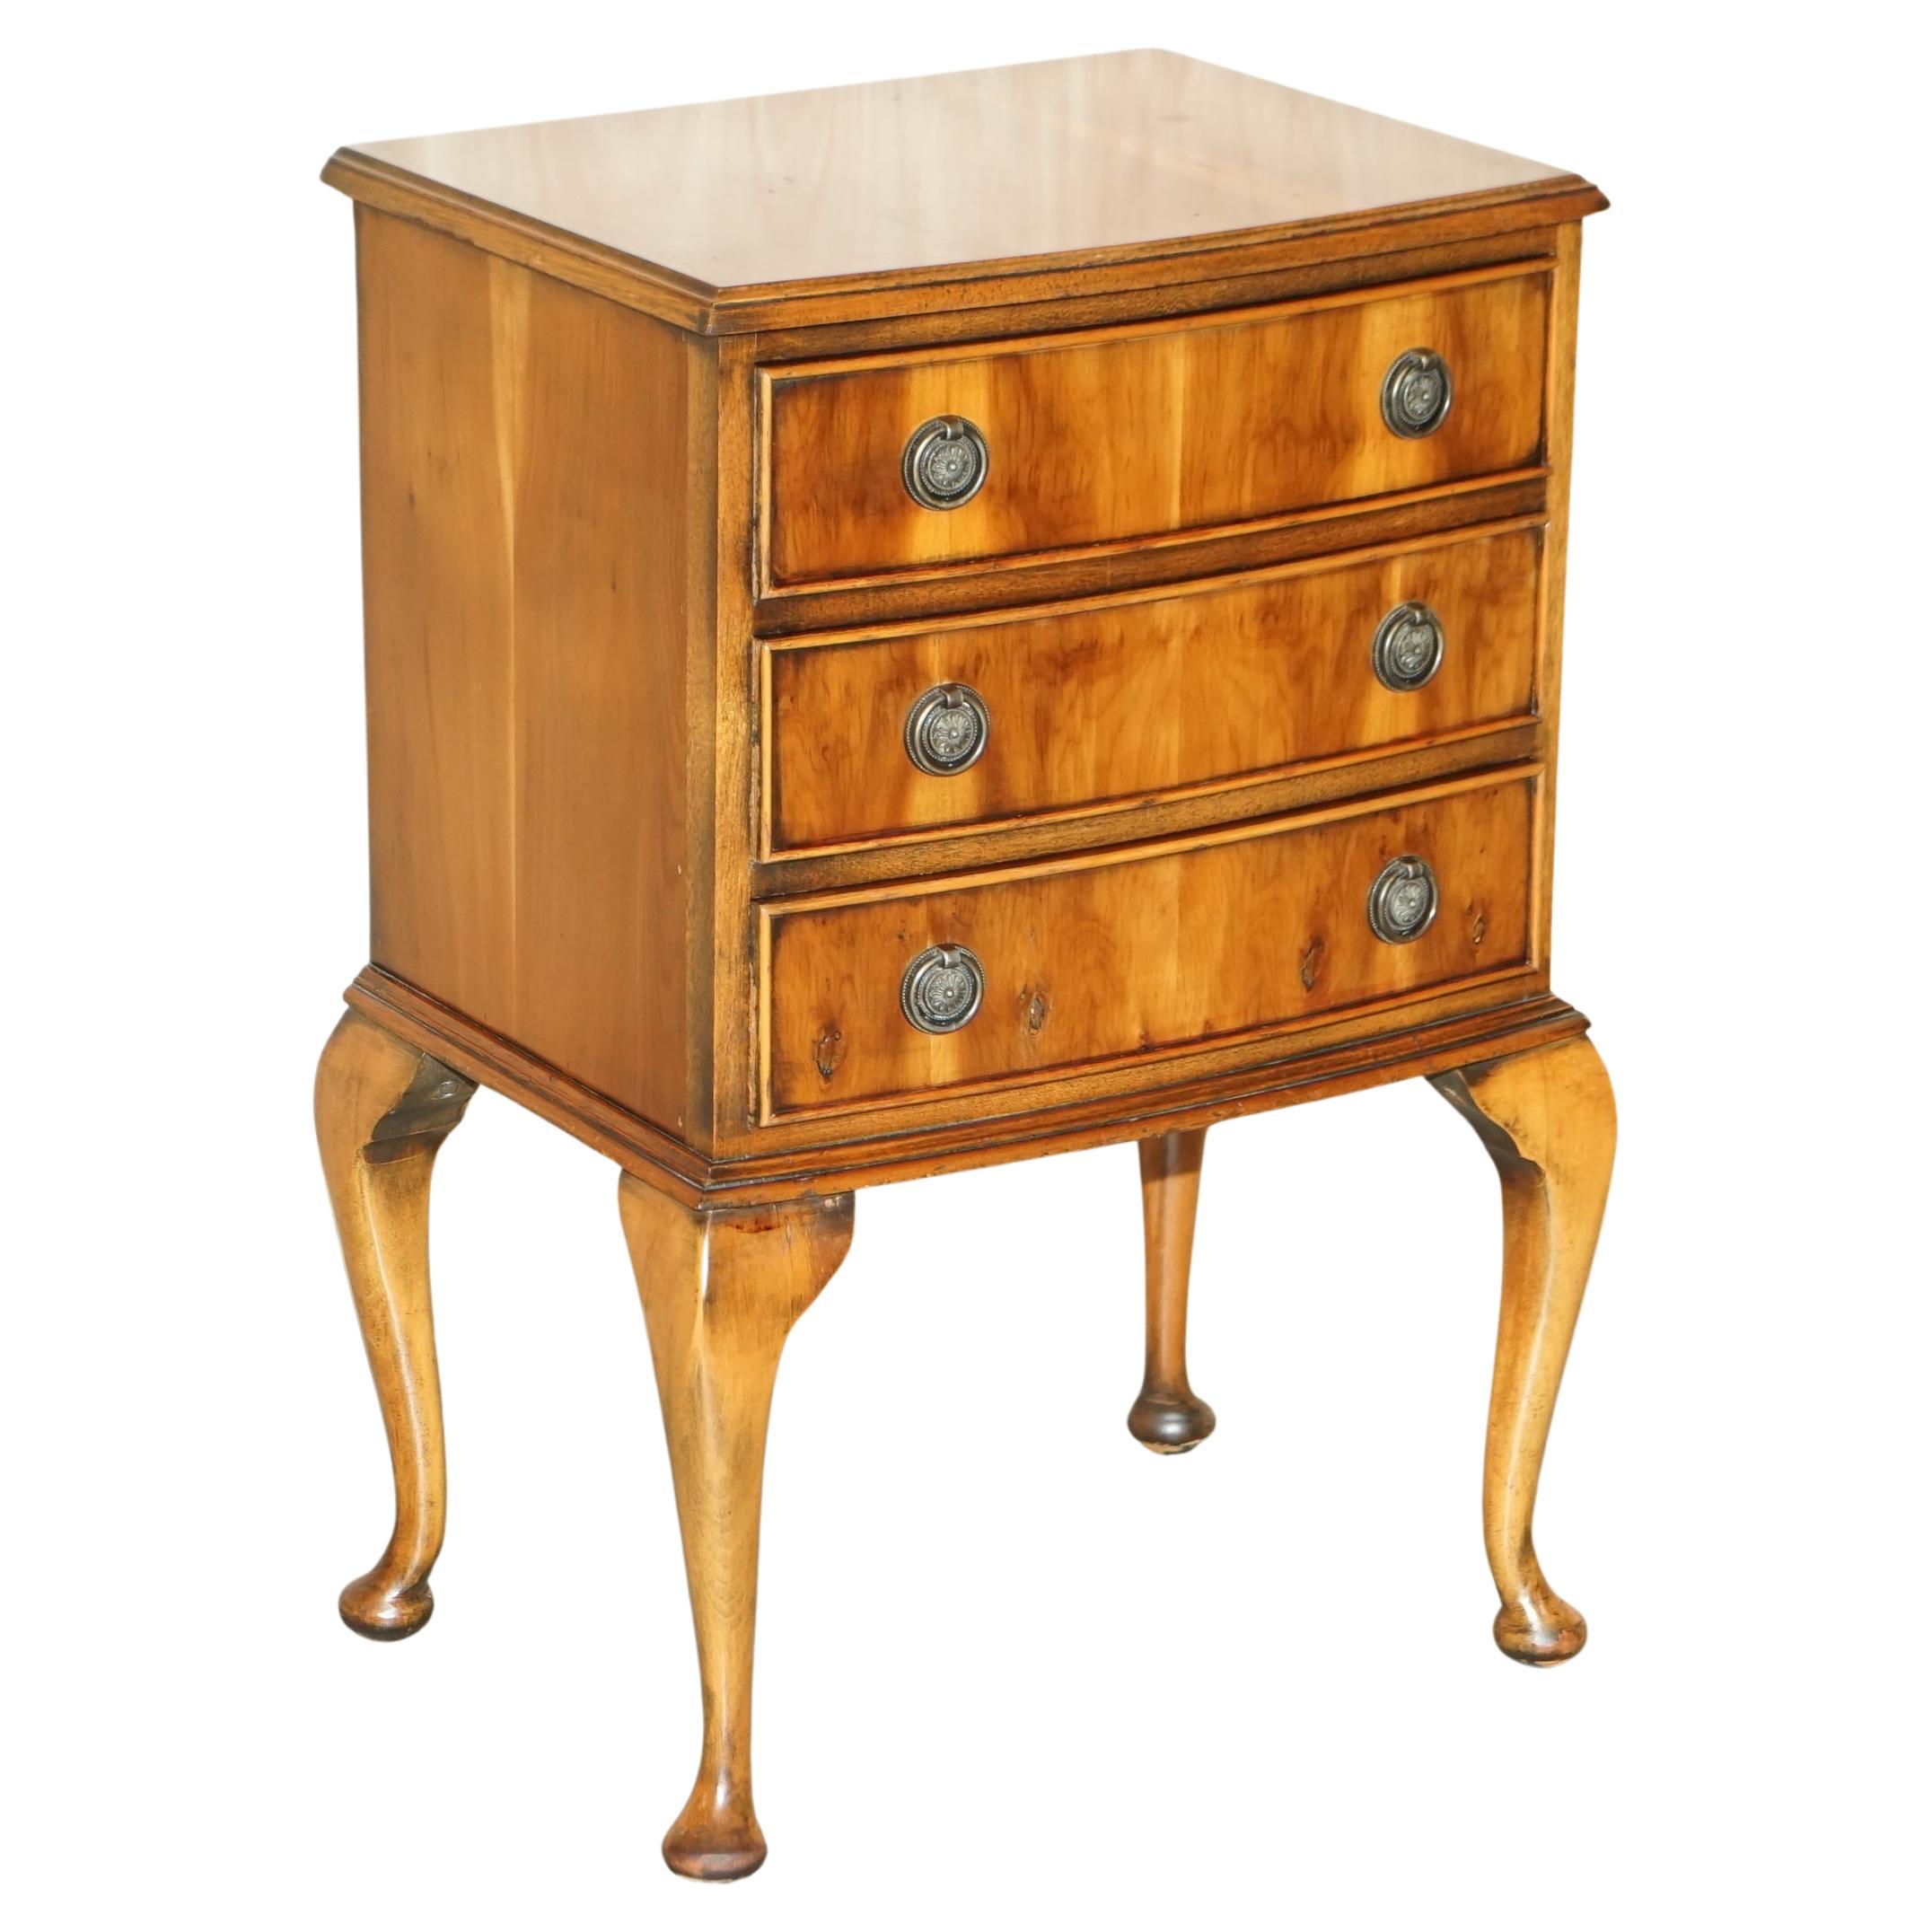 CIRCA 1940's BURR YEW WOOD BOW FRONTED BEDSIDE SIDE TABLE CHEST OF DRAWERS